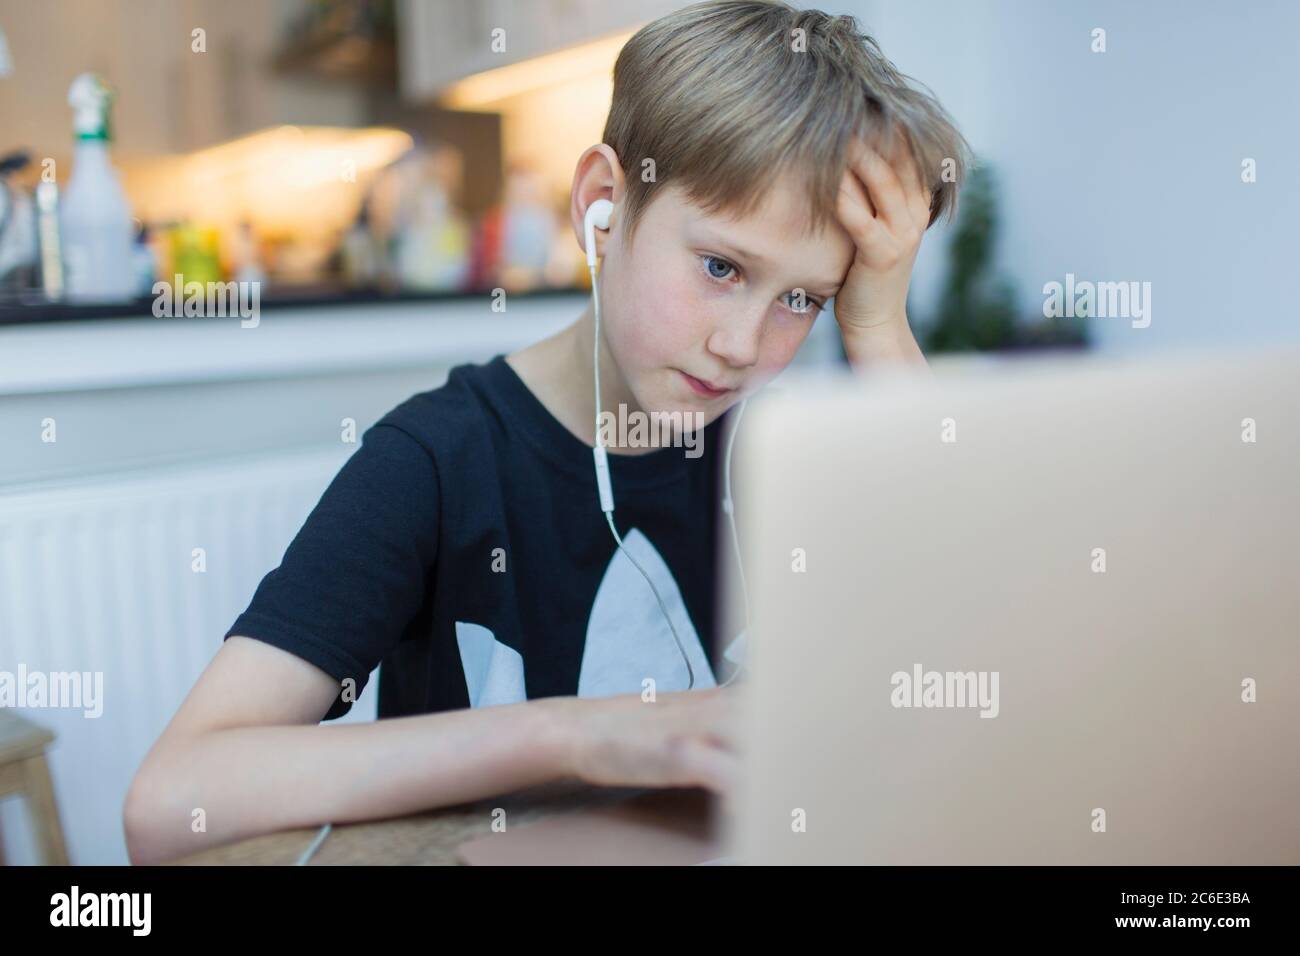 Focused boy with headphones using laptop in kitchen Stock Photo